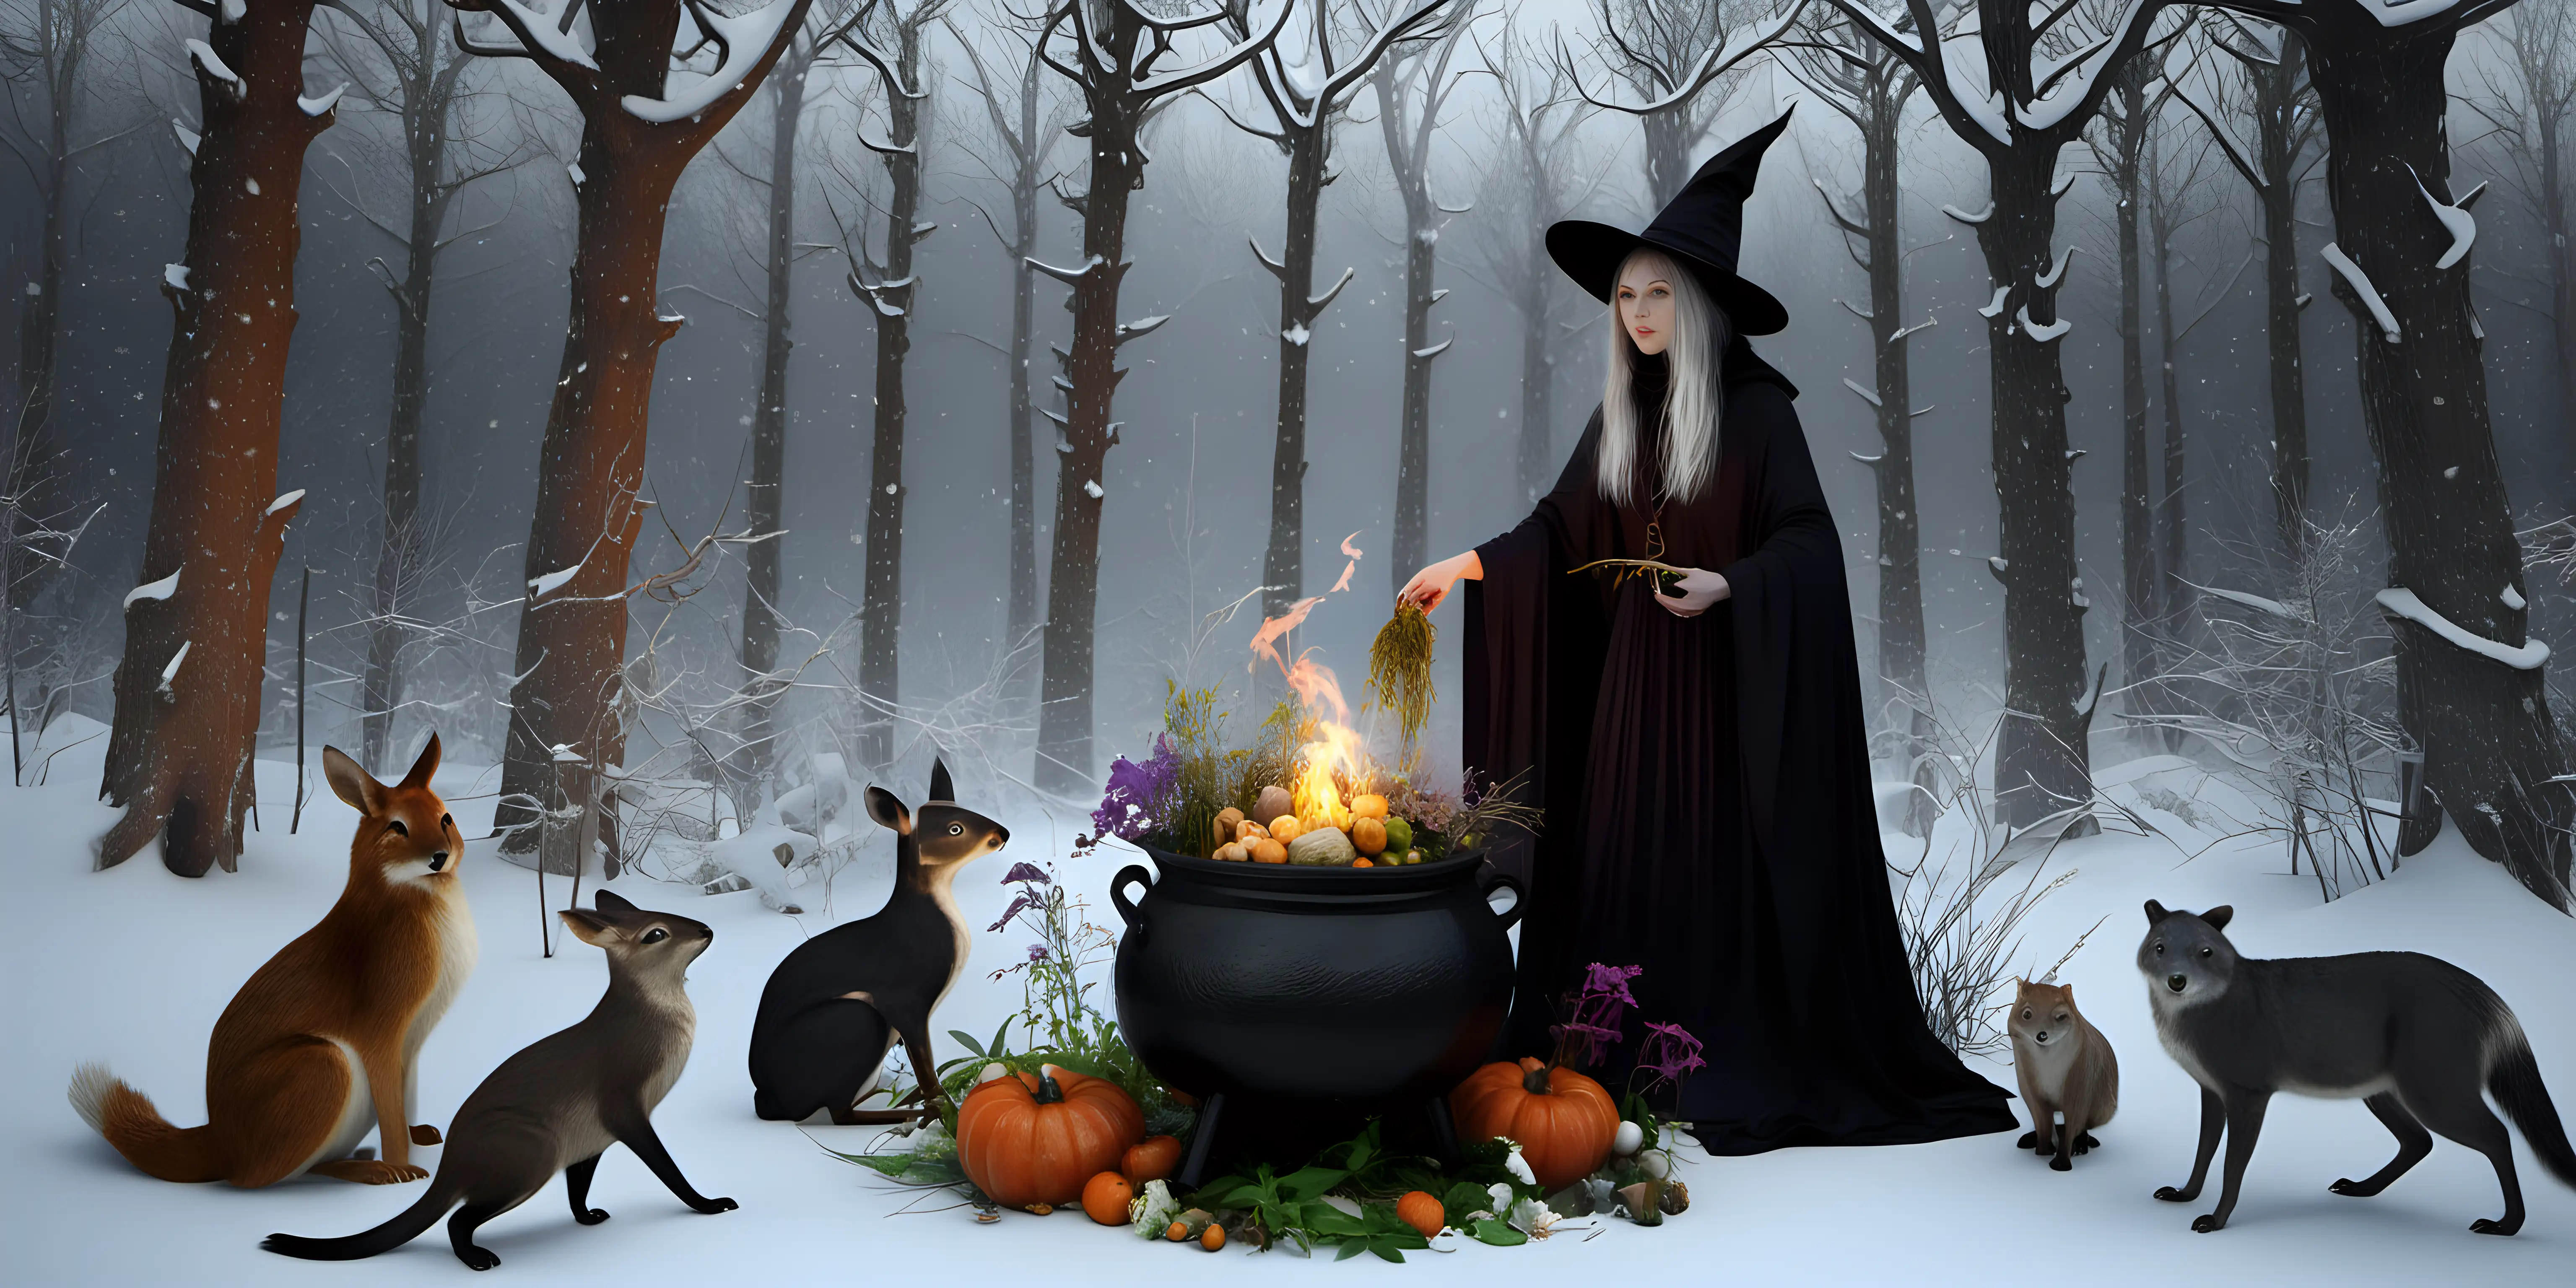 Enchanting Witch Gathering Herbs in Snowy Ancient Forest